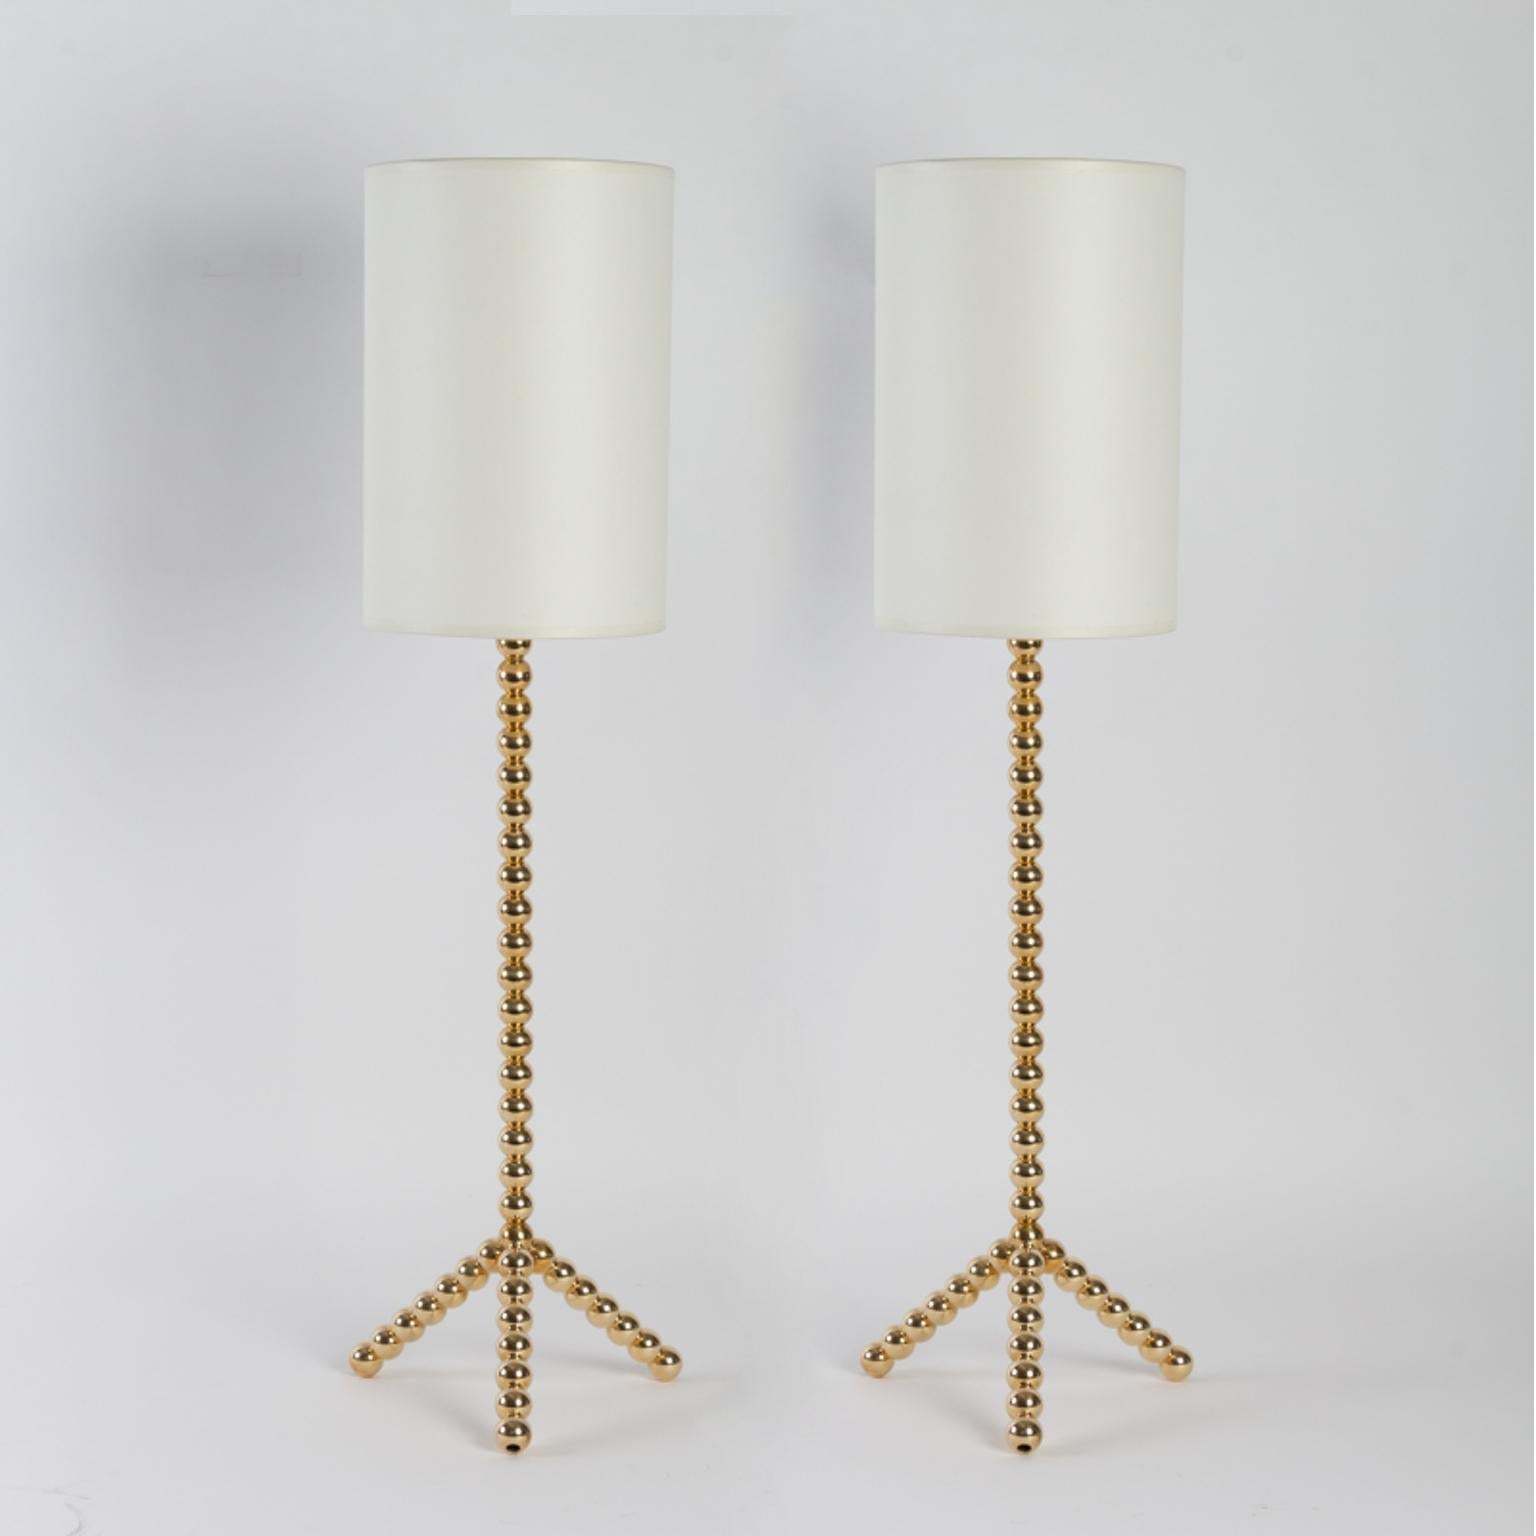 Fancy pair of table lamps, made of solid brass pearls, tripod base and off-white cotton lampshades.
Contemporary creation edited by Vingtieme: our gallery. These lamps are handmade in Paris, in the Marais district by skilled craftsmen of the